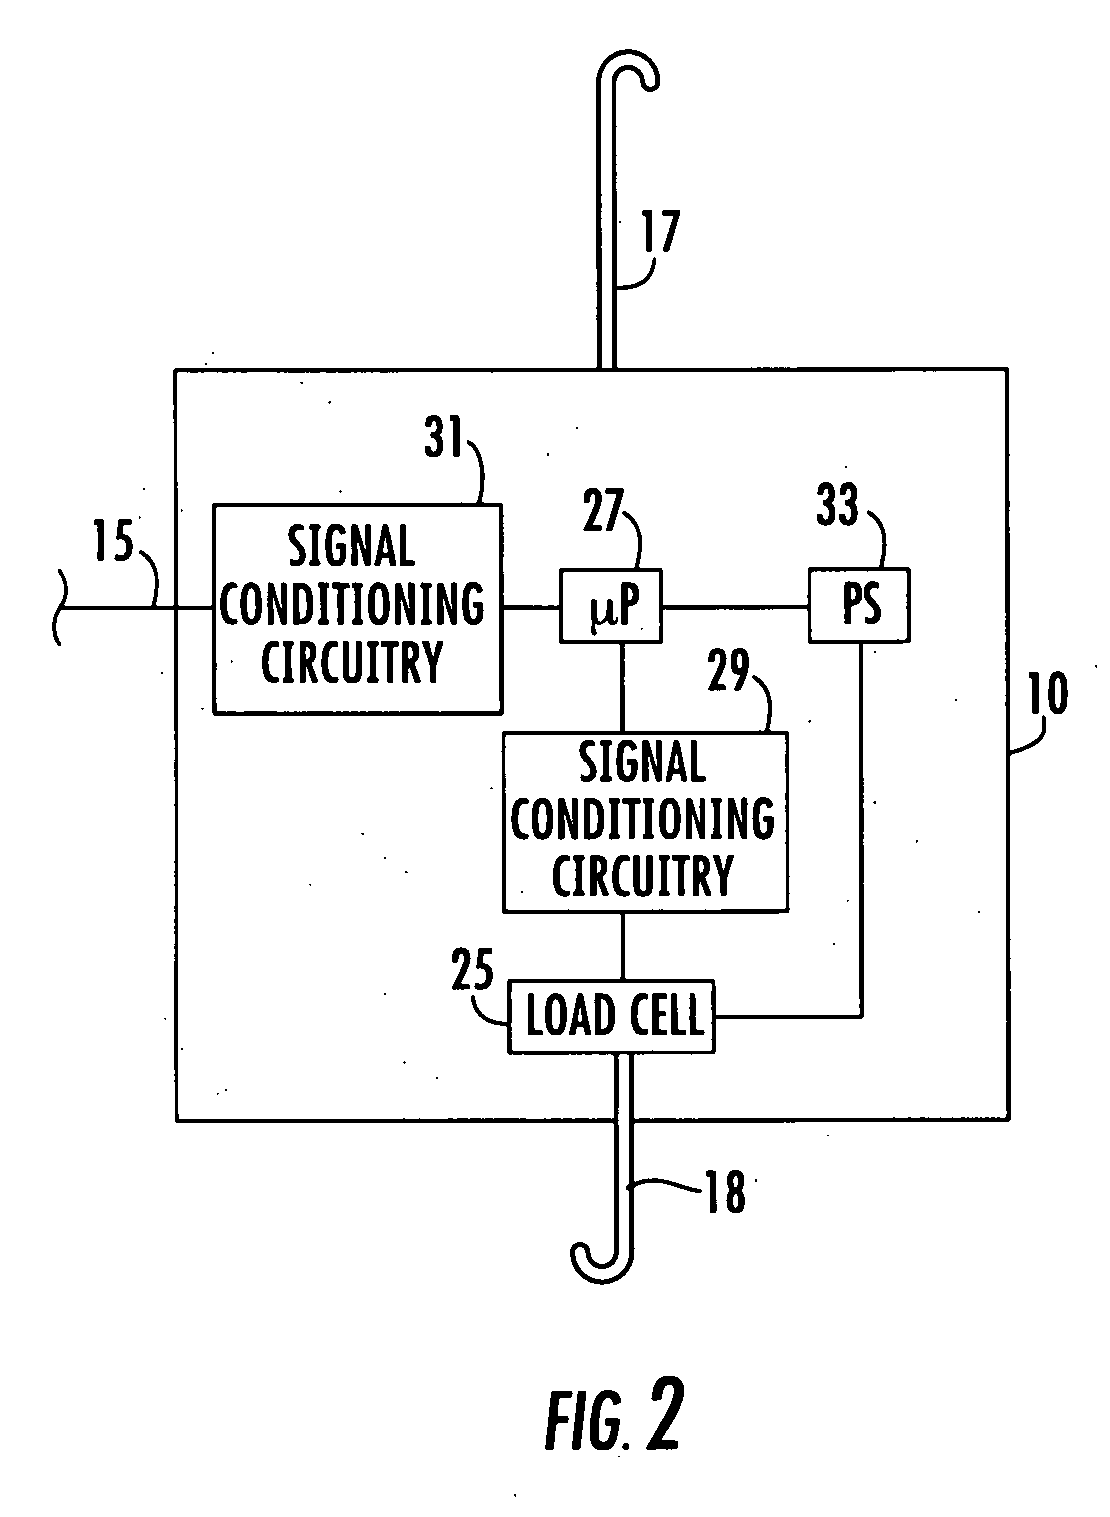 Patient hydration/fluid administration system and method